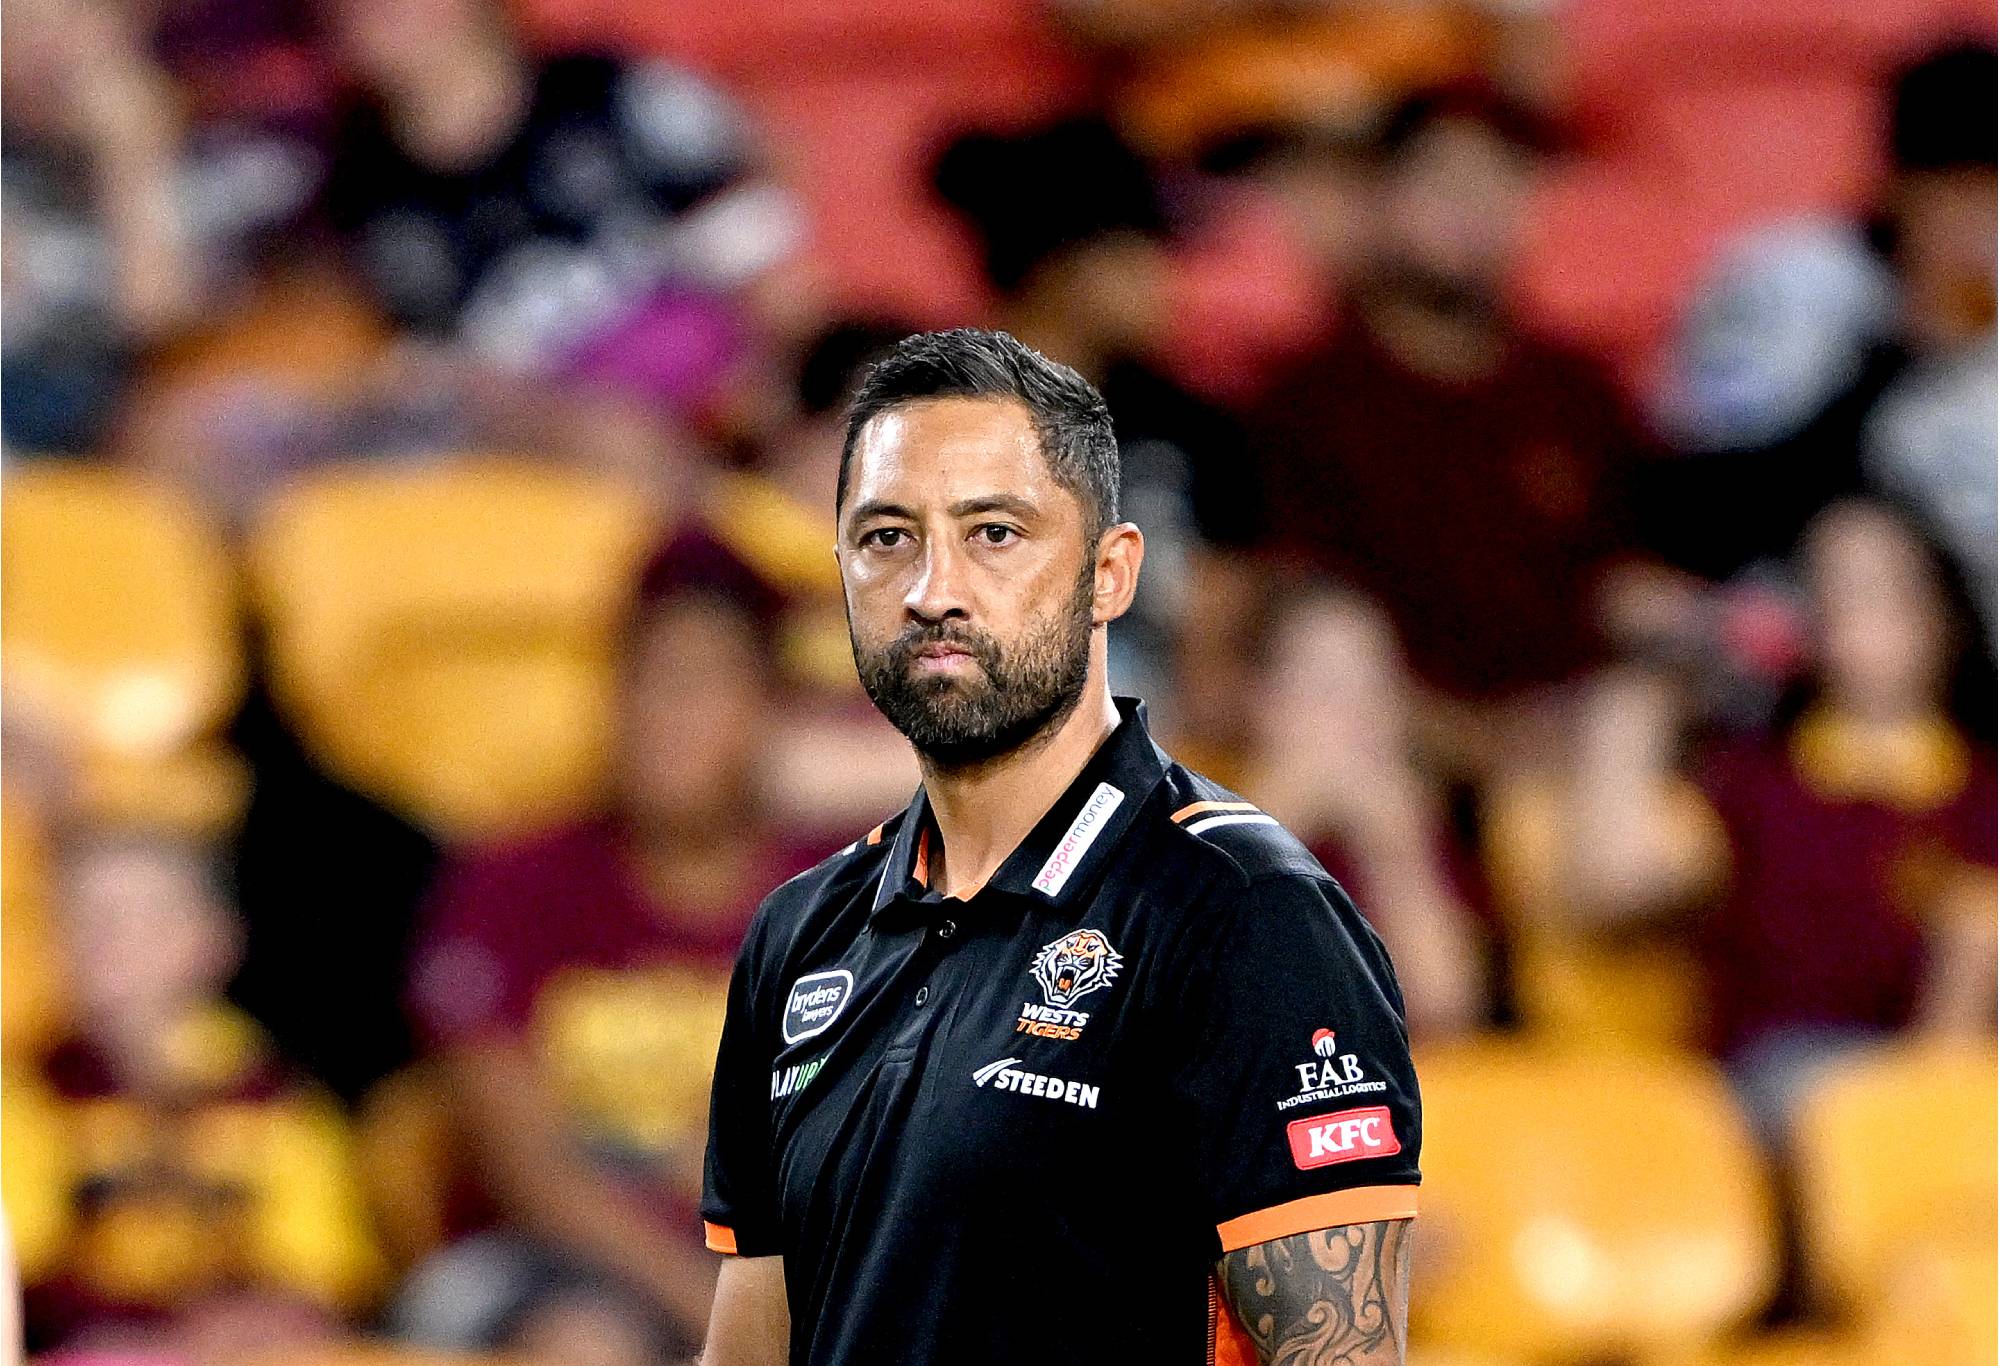 BRISBANE, AUSTRALIA - APRIL 01: Assistant Coach Benji Marshall of the Tigers watches on during the warm up before the round five NRL match between Brisbane Broncos and Wests Tigers at Suncorp Stadium on April 01, 2023 in Brisbane, Australia. (Photo by Bradley Kanaris/Getty Images)